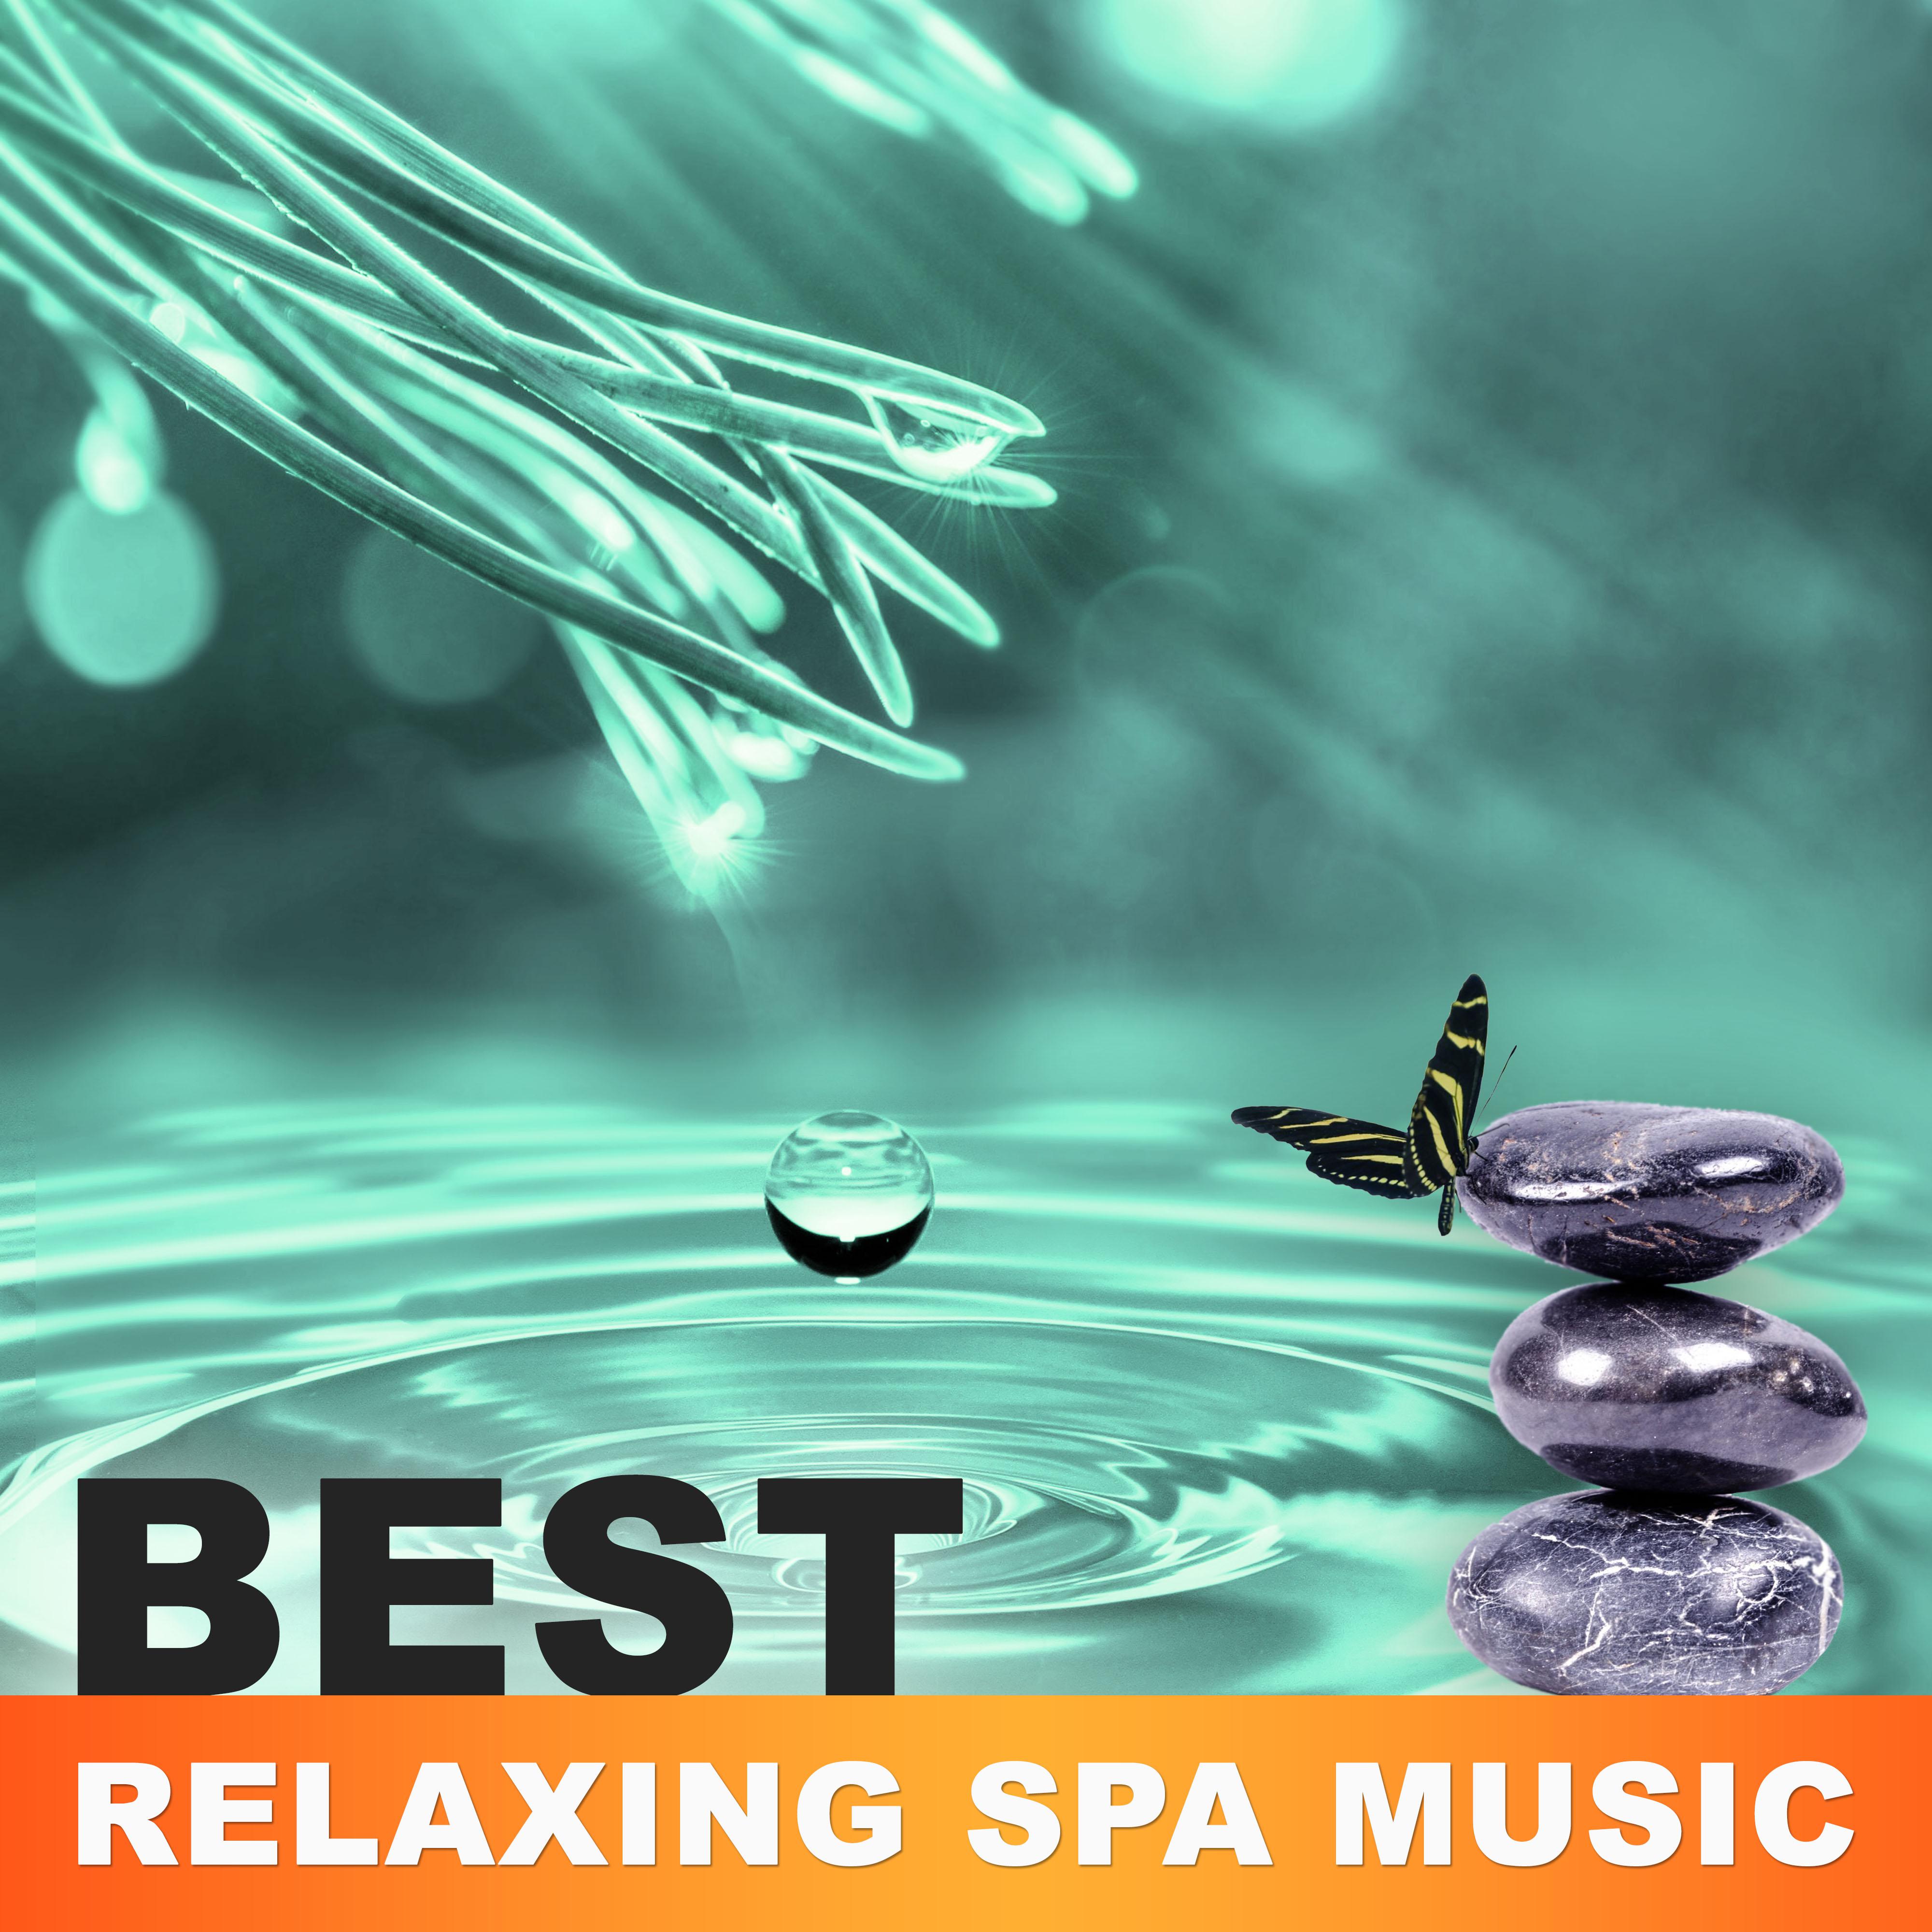 Best Relaxing Spa Music  Healing Reiki, Nature Sounds, Yoga Music, Deep Meditation, Inner Balance, Pure Relaxing Therapy, Awareness